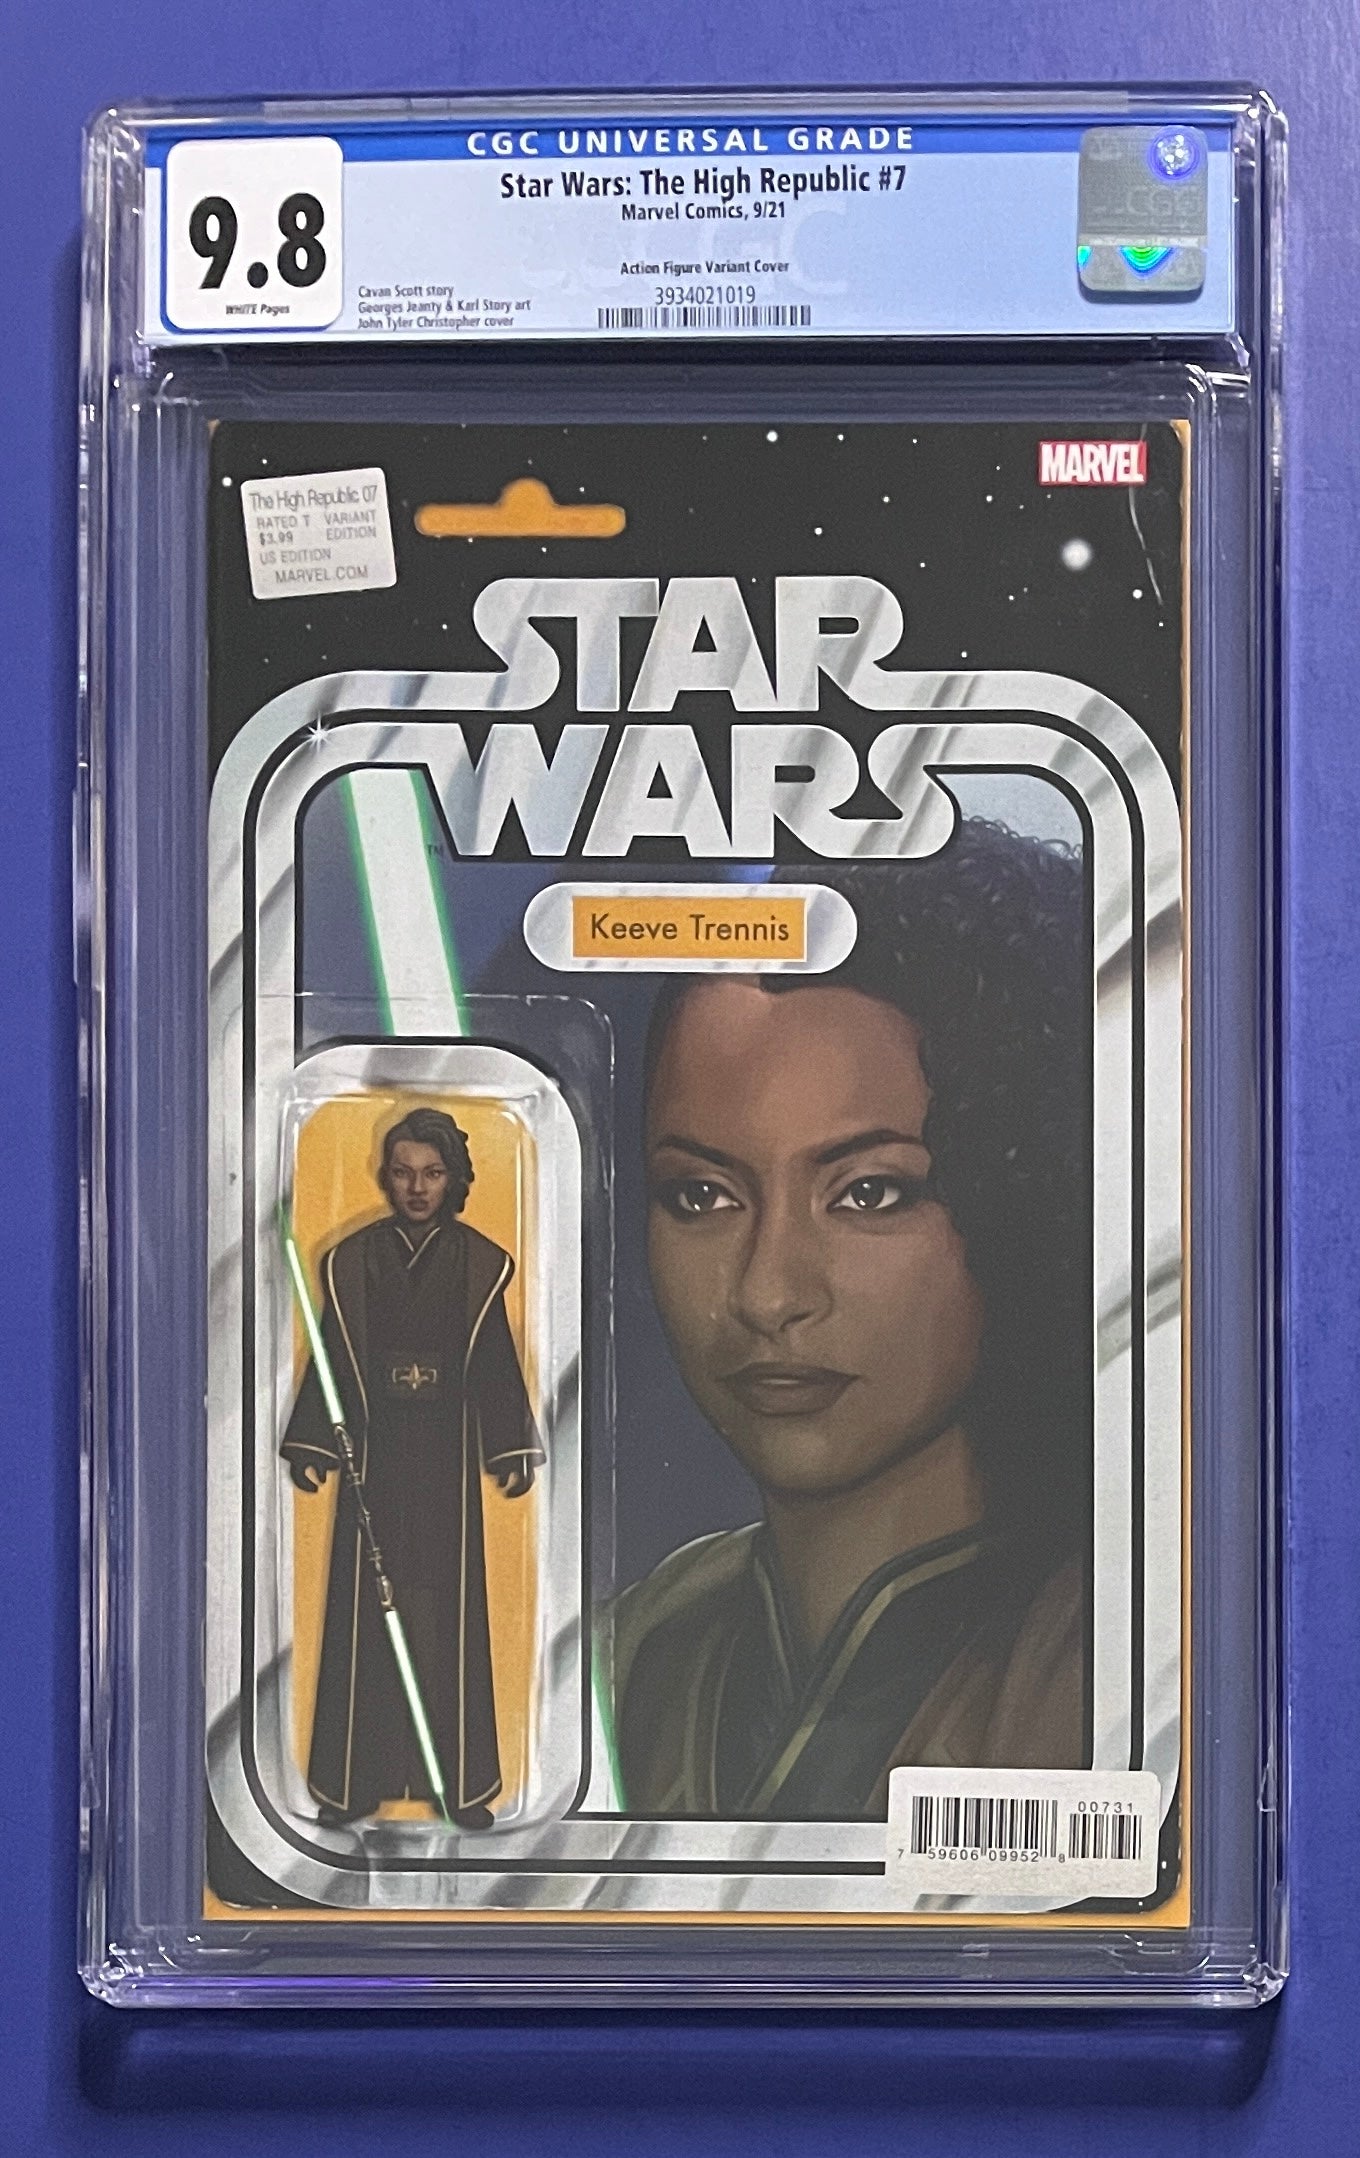 STAR WARS: THE HIGH REPUBLIC #7 CHRISTOPHER ACTION FIGURE VARIANT (VOL. 1) CGC 9.8 WP 1ST APPEARANCE OF DARTH KRALL